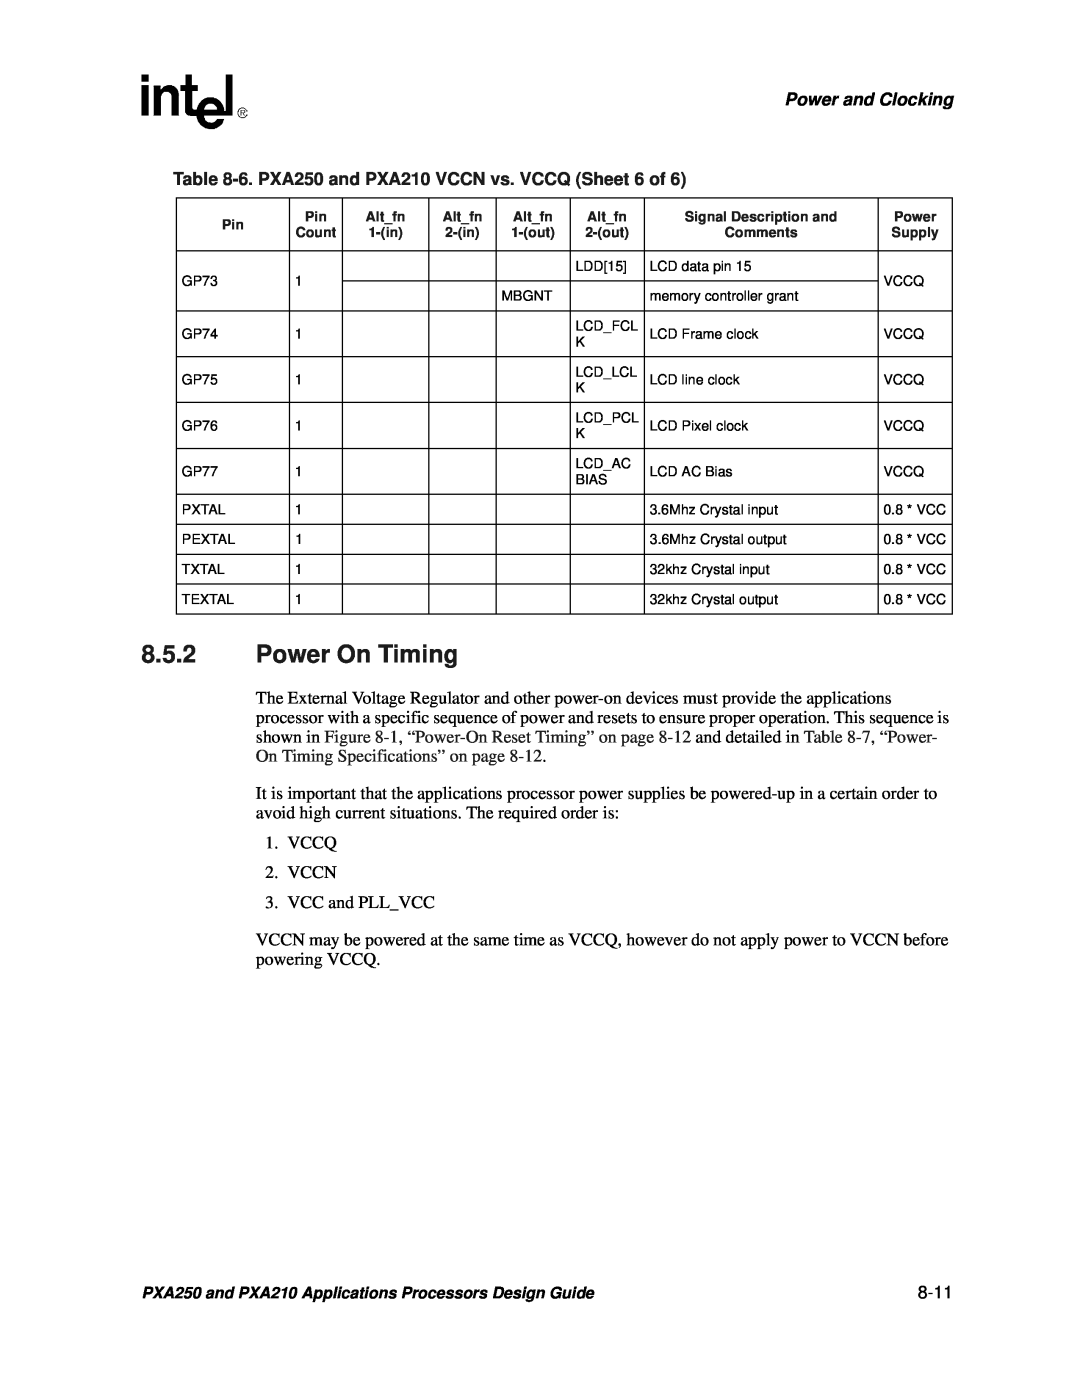 Intel manual Power On Timing, Power and Clocking, 6. PXA250 and PXA210 VCCN vs. VCCQ Sheet 6 of, 8-11 